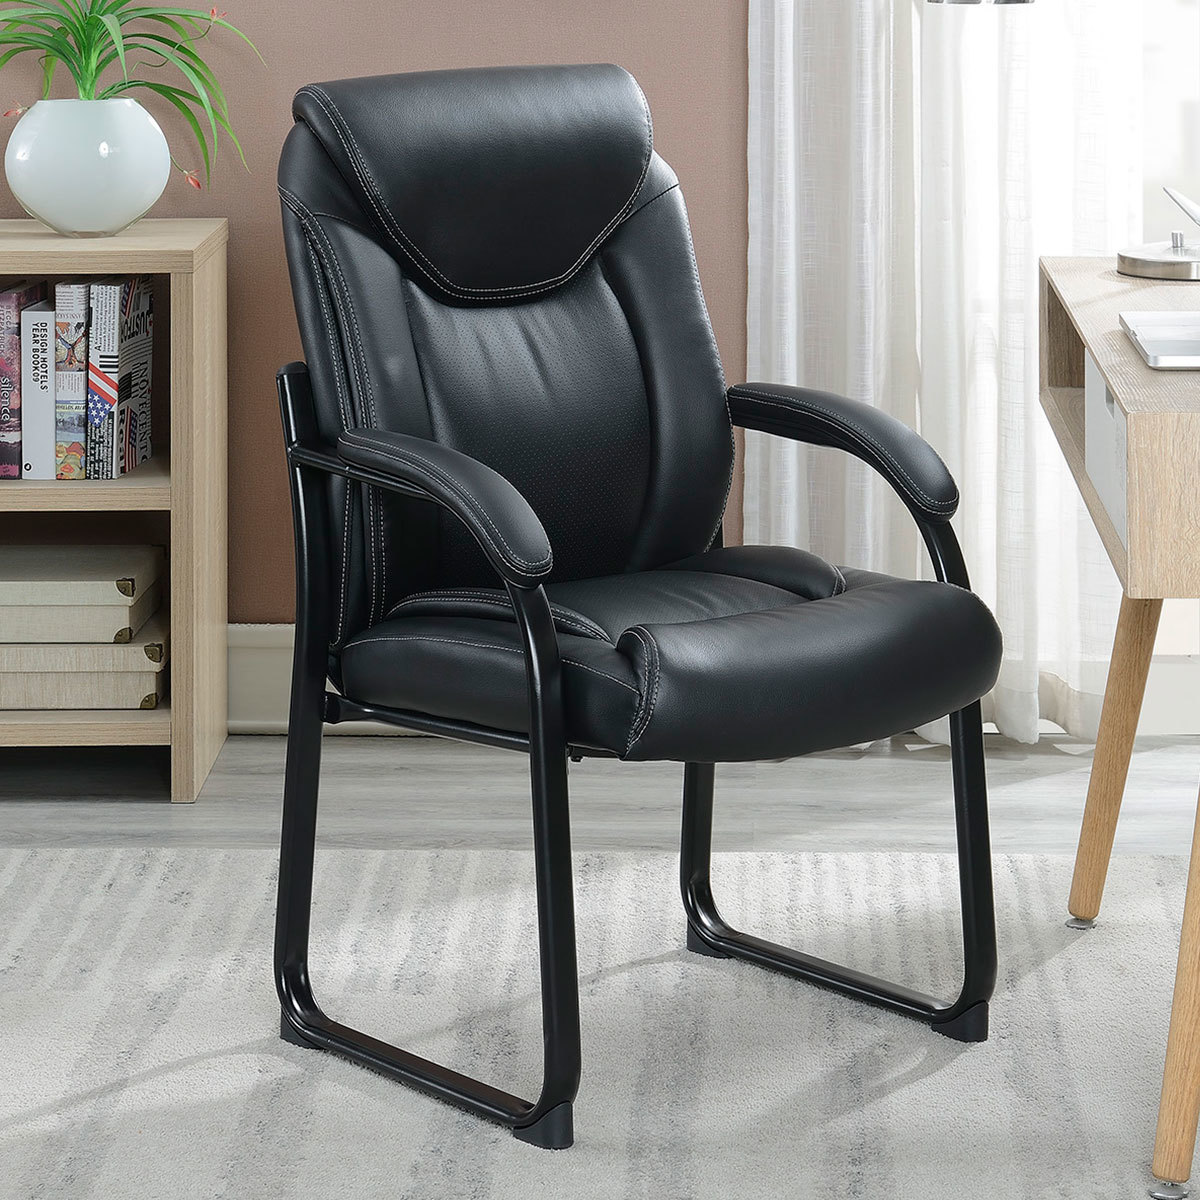 Executive Leather Office Chair Costco : Office Chairs Costco : These